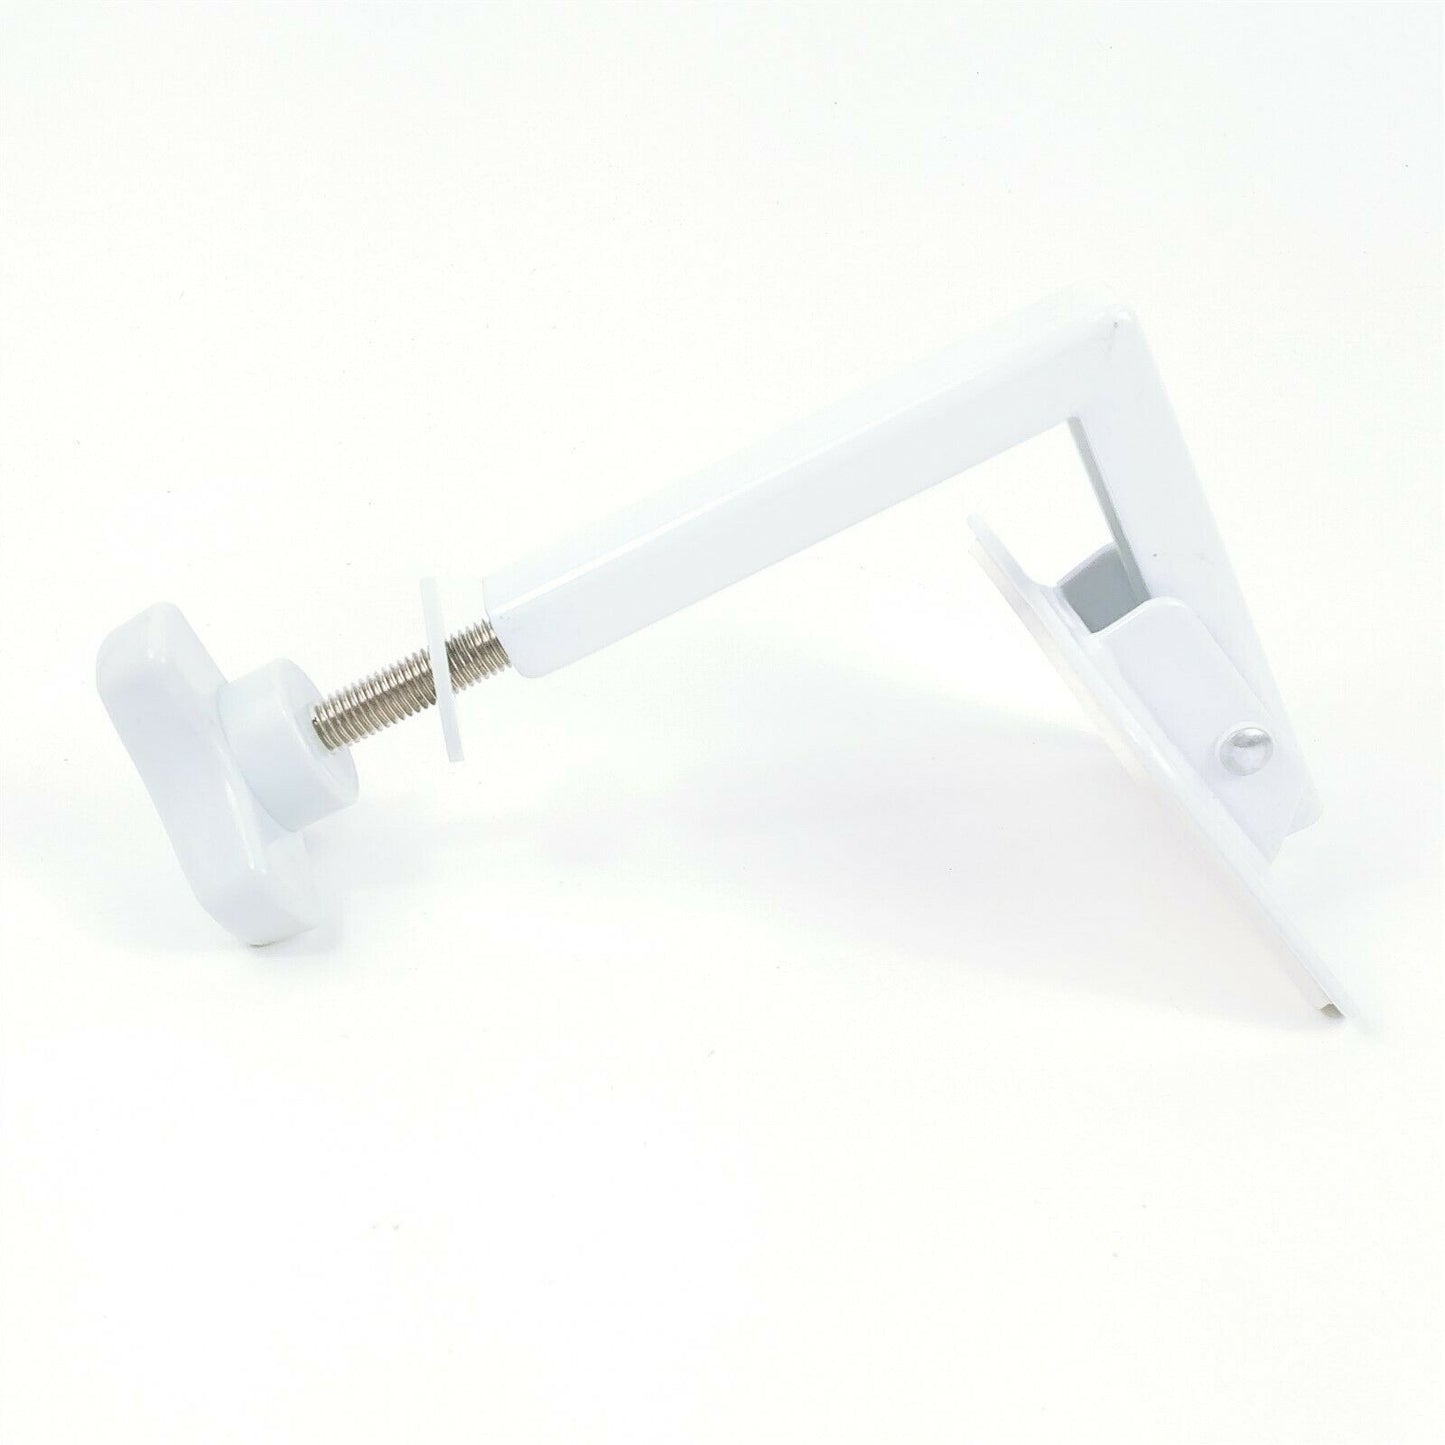 Medline Tab Grab Bar Replacement Adjustable Plate with Threaded Knob